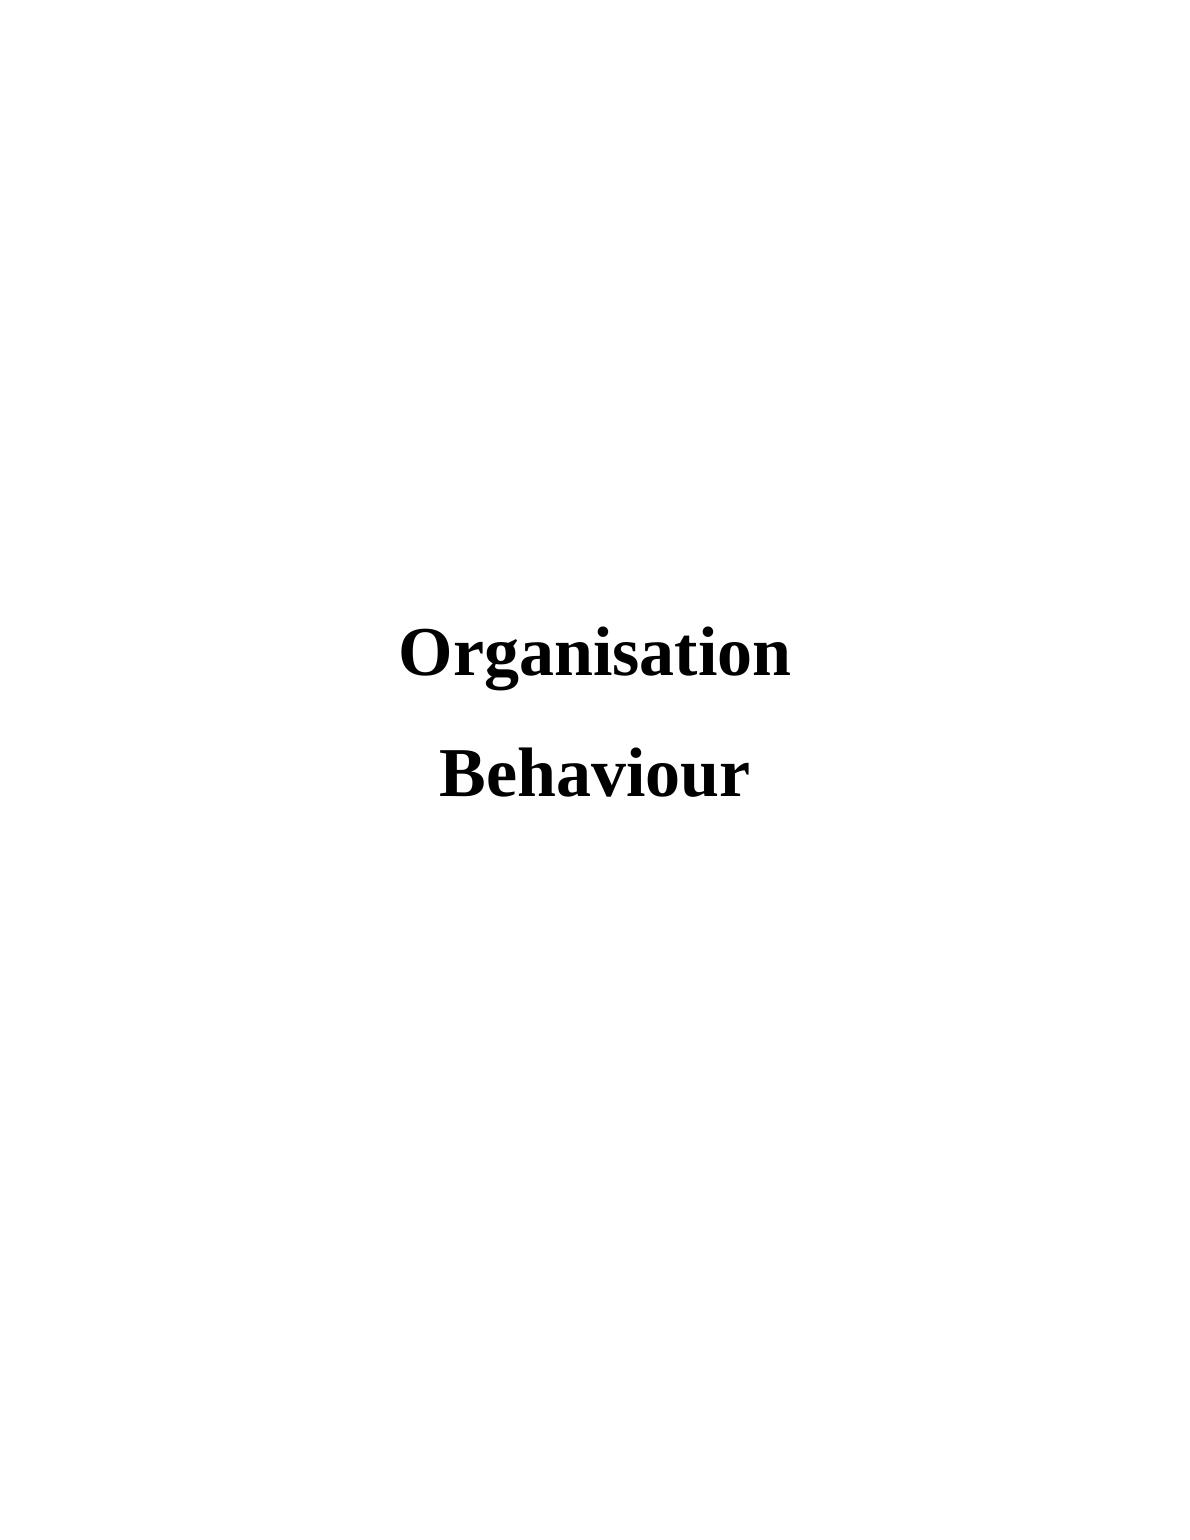 Influence of Culture, Politics, and Power on Individual and Team Behaviour in an Organization_1